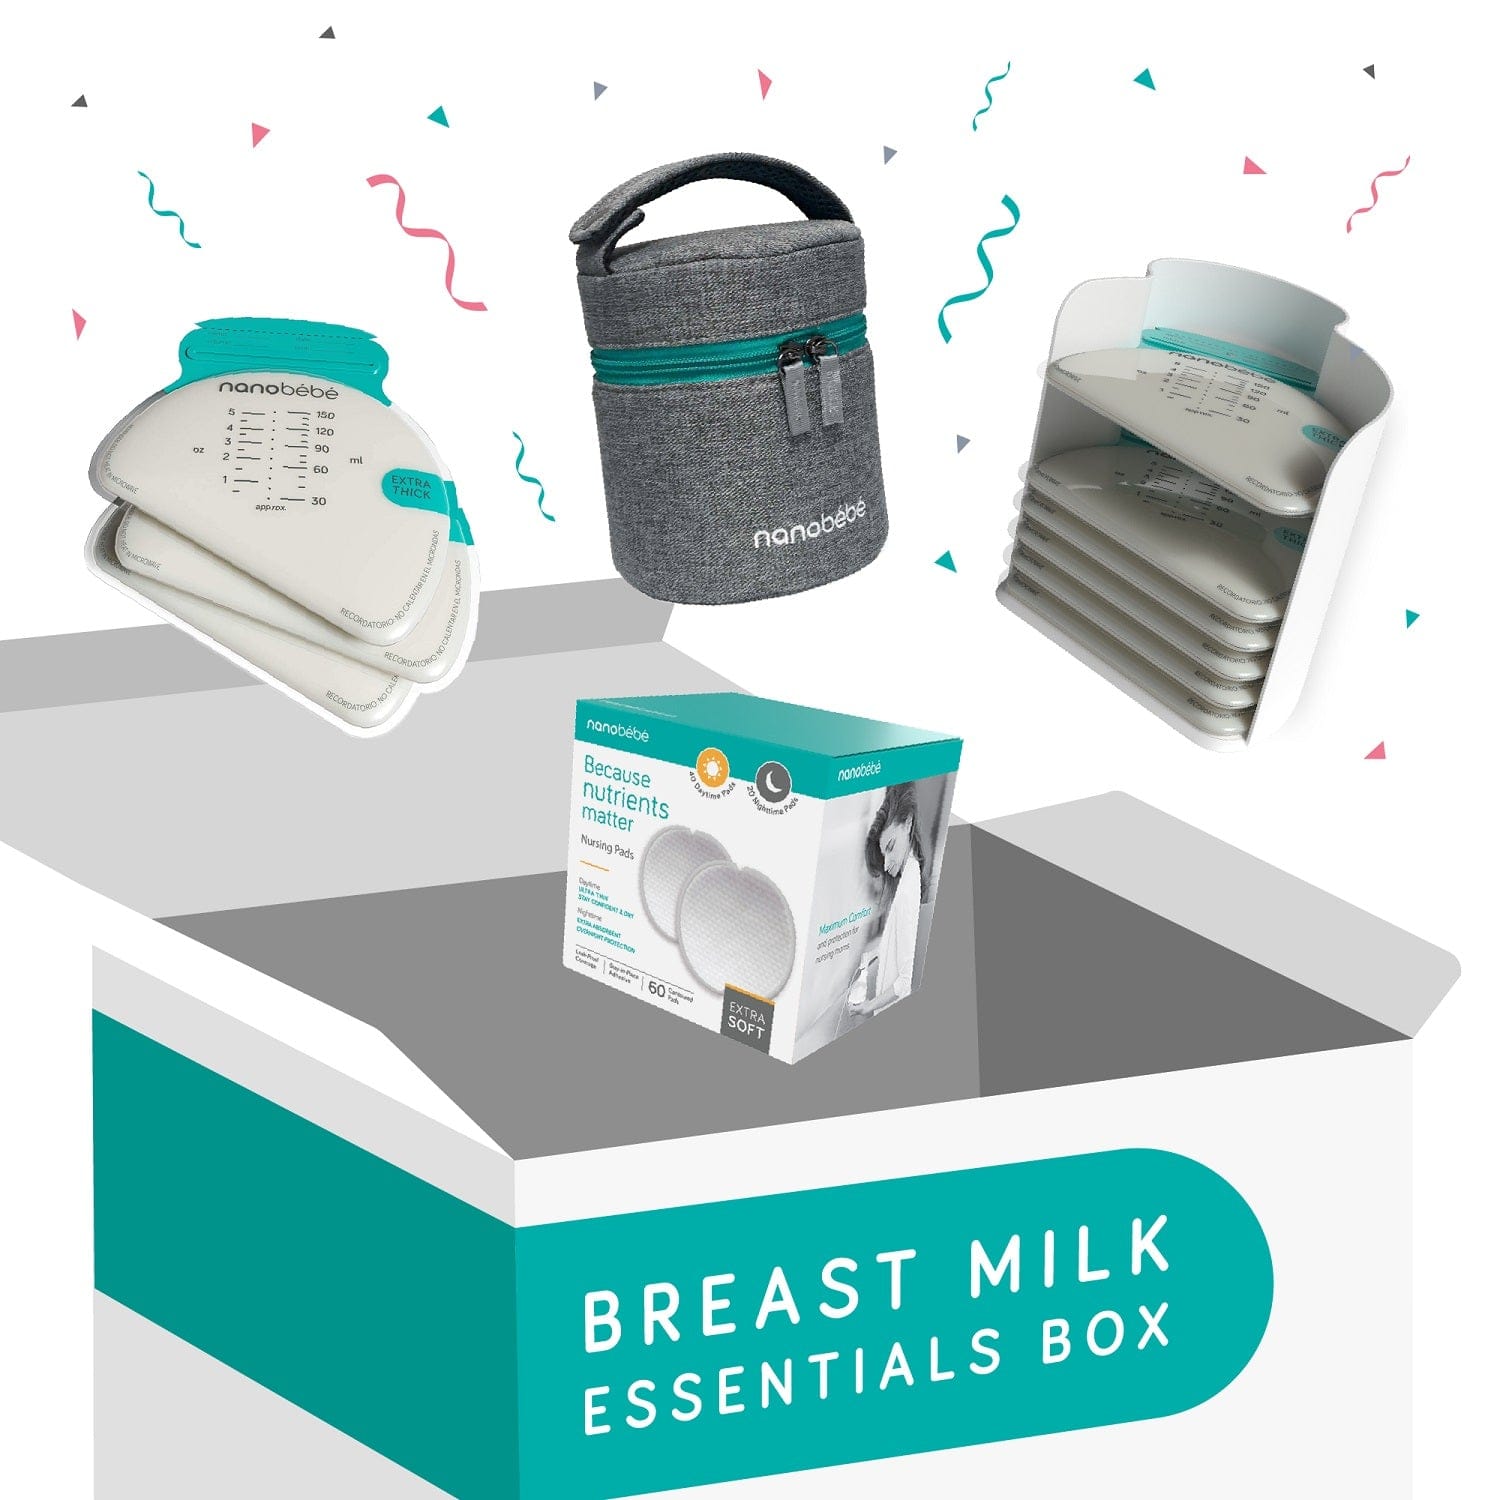 Starter Set - Reusable Breastmilk Storage Bags and Lacticups® Essentials  (Stoppers Included)